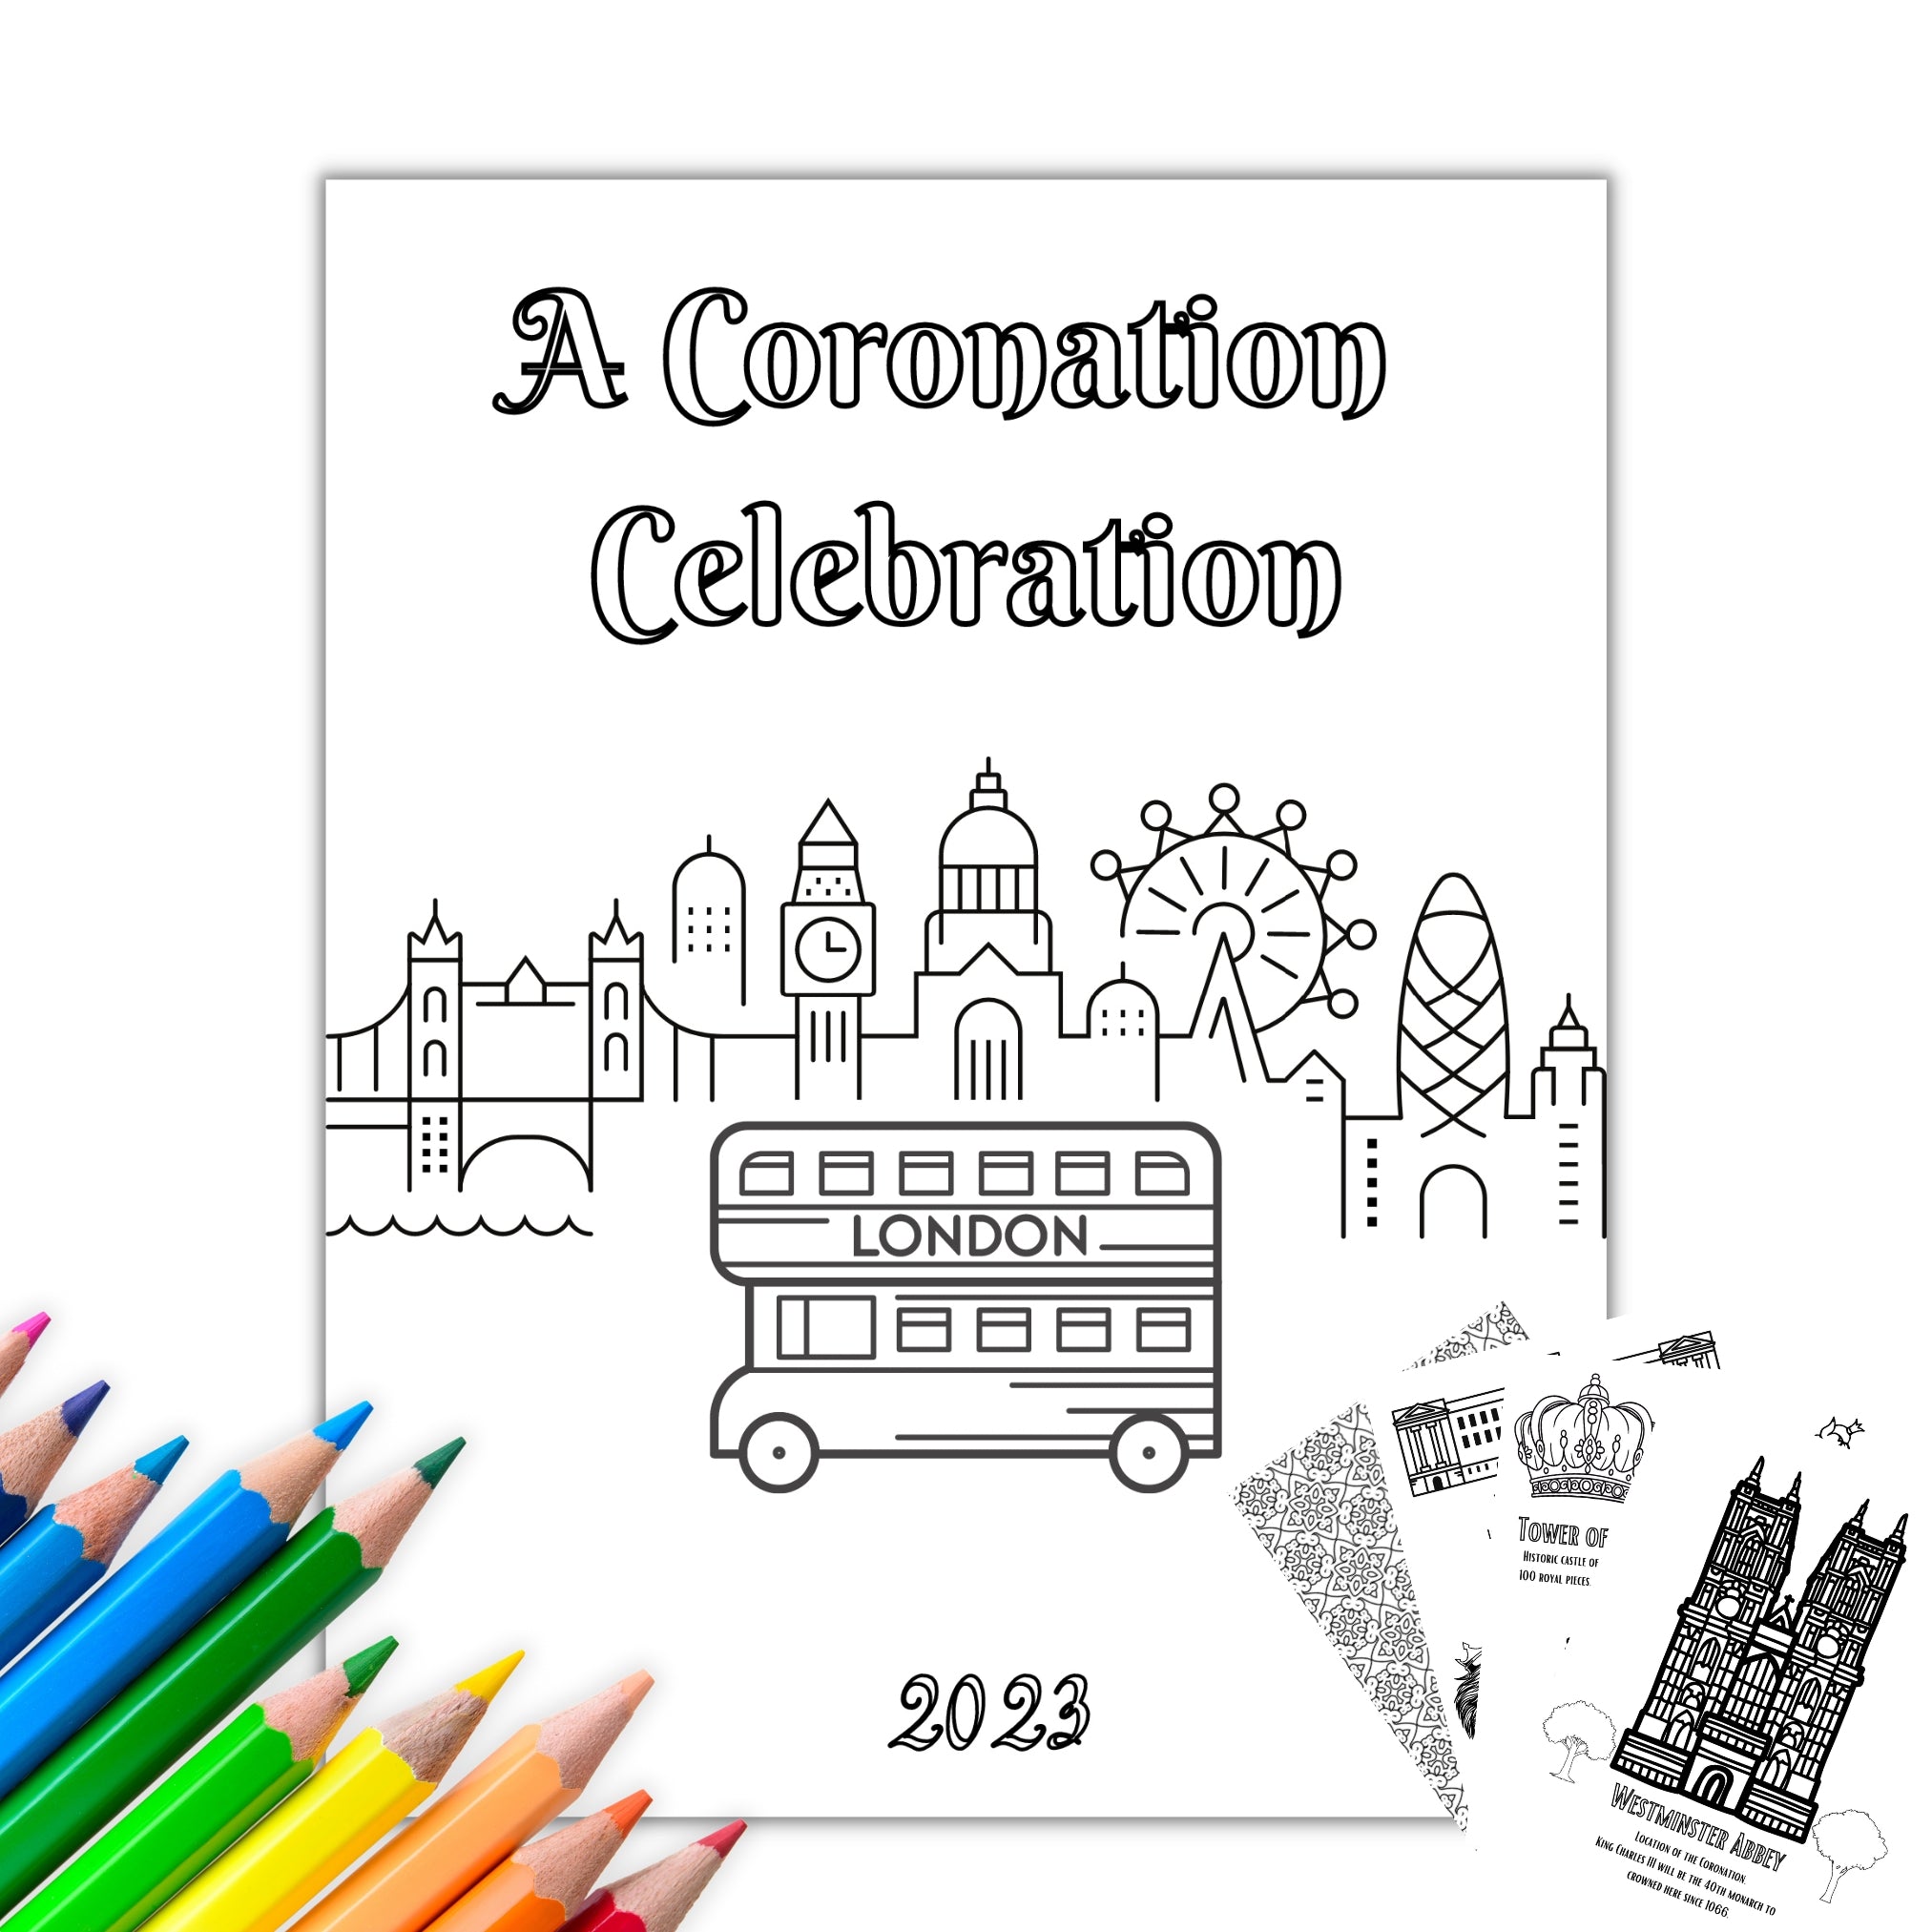 London coronation coloring activity book pages